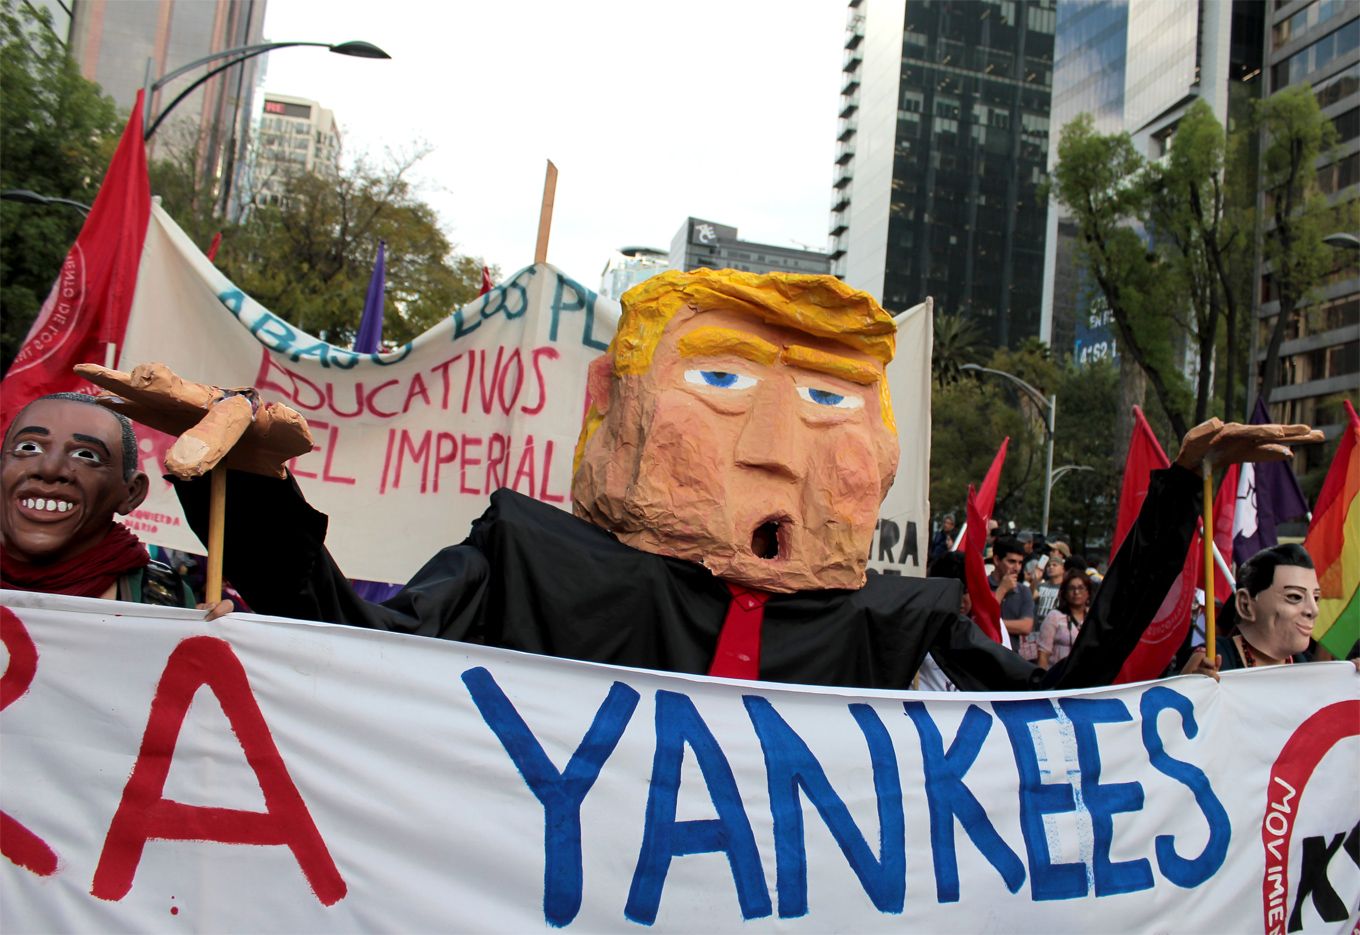 ¡Fuera, Trump! ¡Fuera, Yankees, de América Latina! Demonstration in Mexico City on January 20. Image by Adrián Martínez. Mexico, 2017.